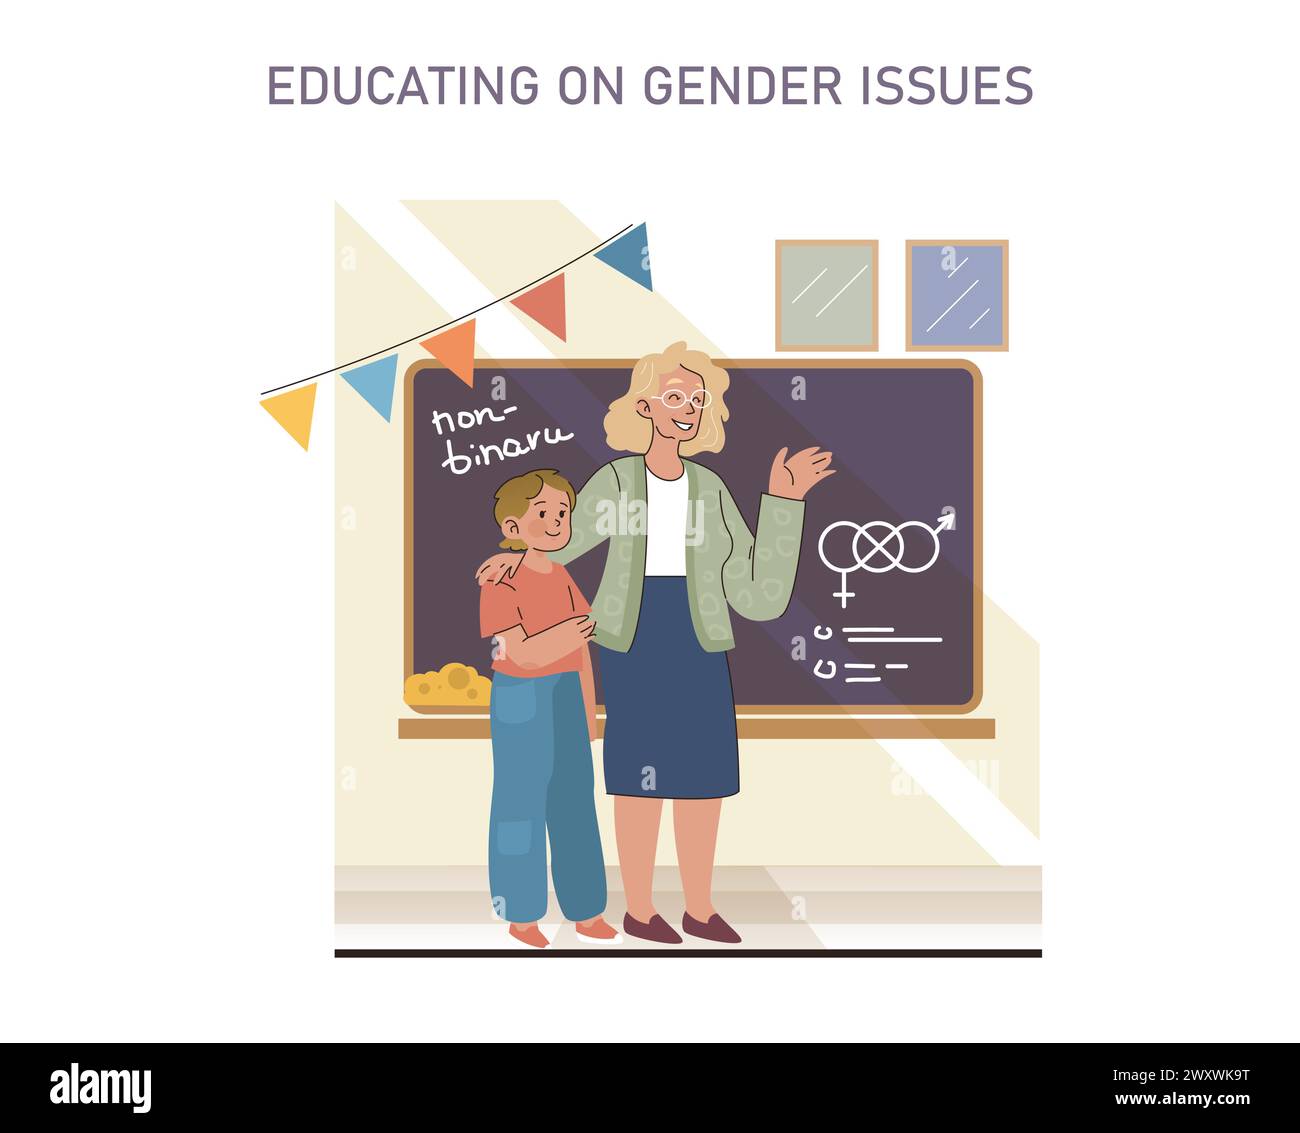 Educating on Gender Issues concept. A nurturing educational scene where knowledge about gender diversity is shared with the younger generation. Stock Vector